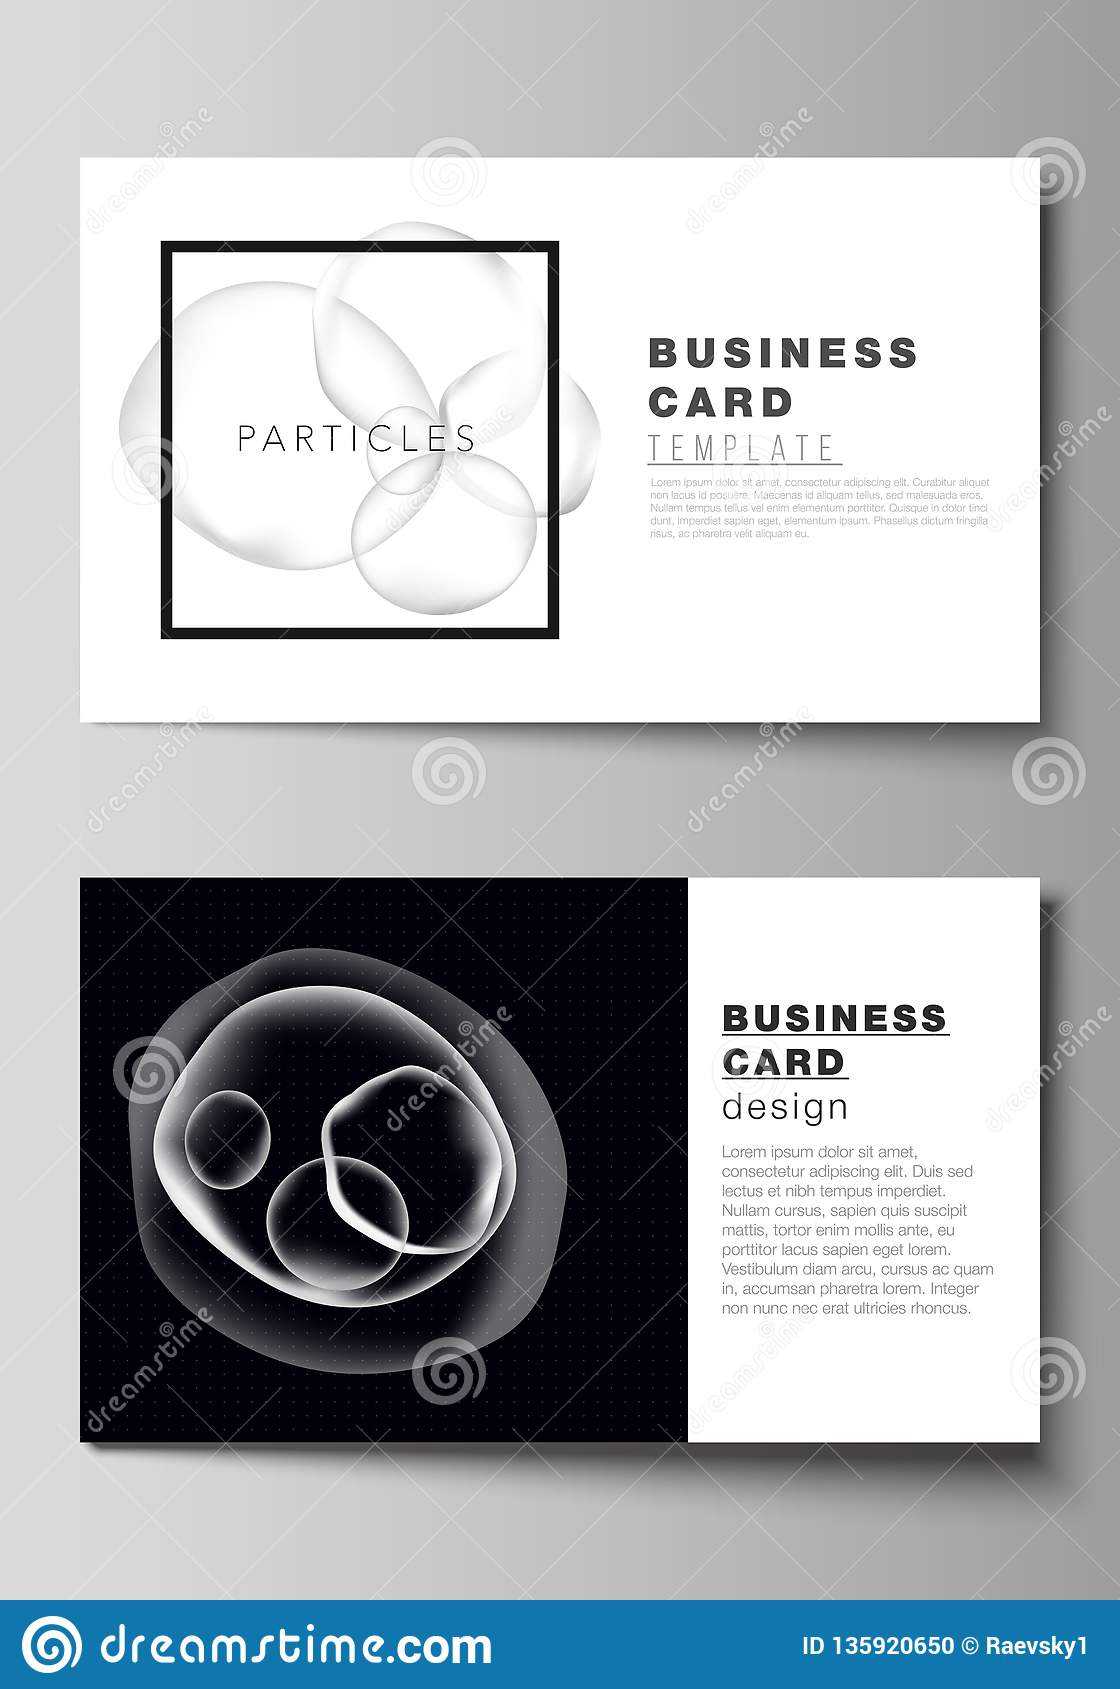 The Minimalistic Editable Vector Layout Of Two Creative Intended For Medical Business Cards Templates Free